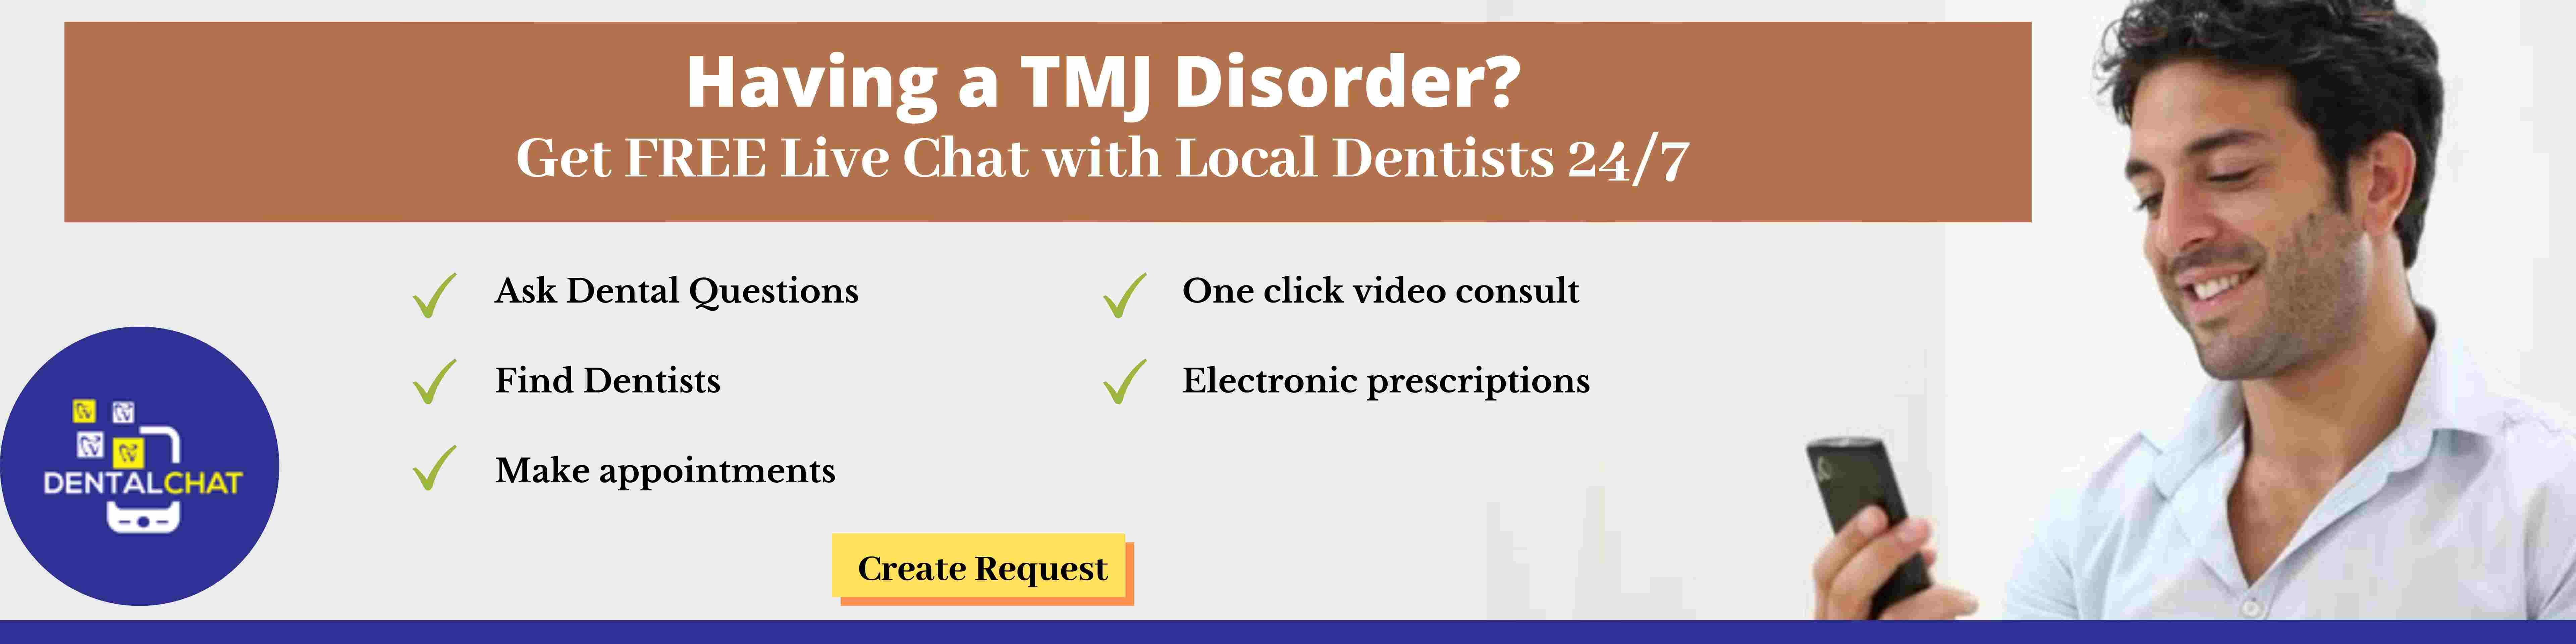 Local tmj pain chatting, tmj teledentistry consulting and TMD question blog online